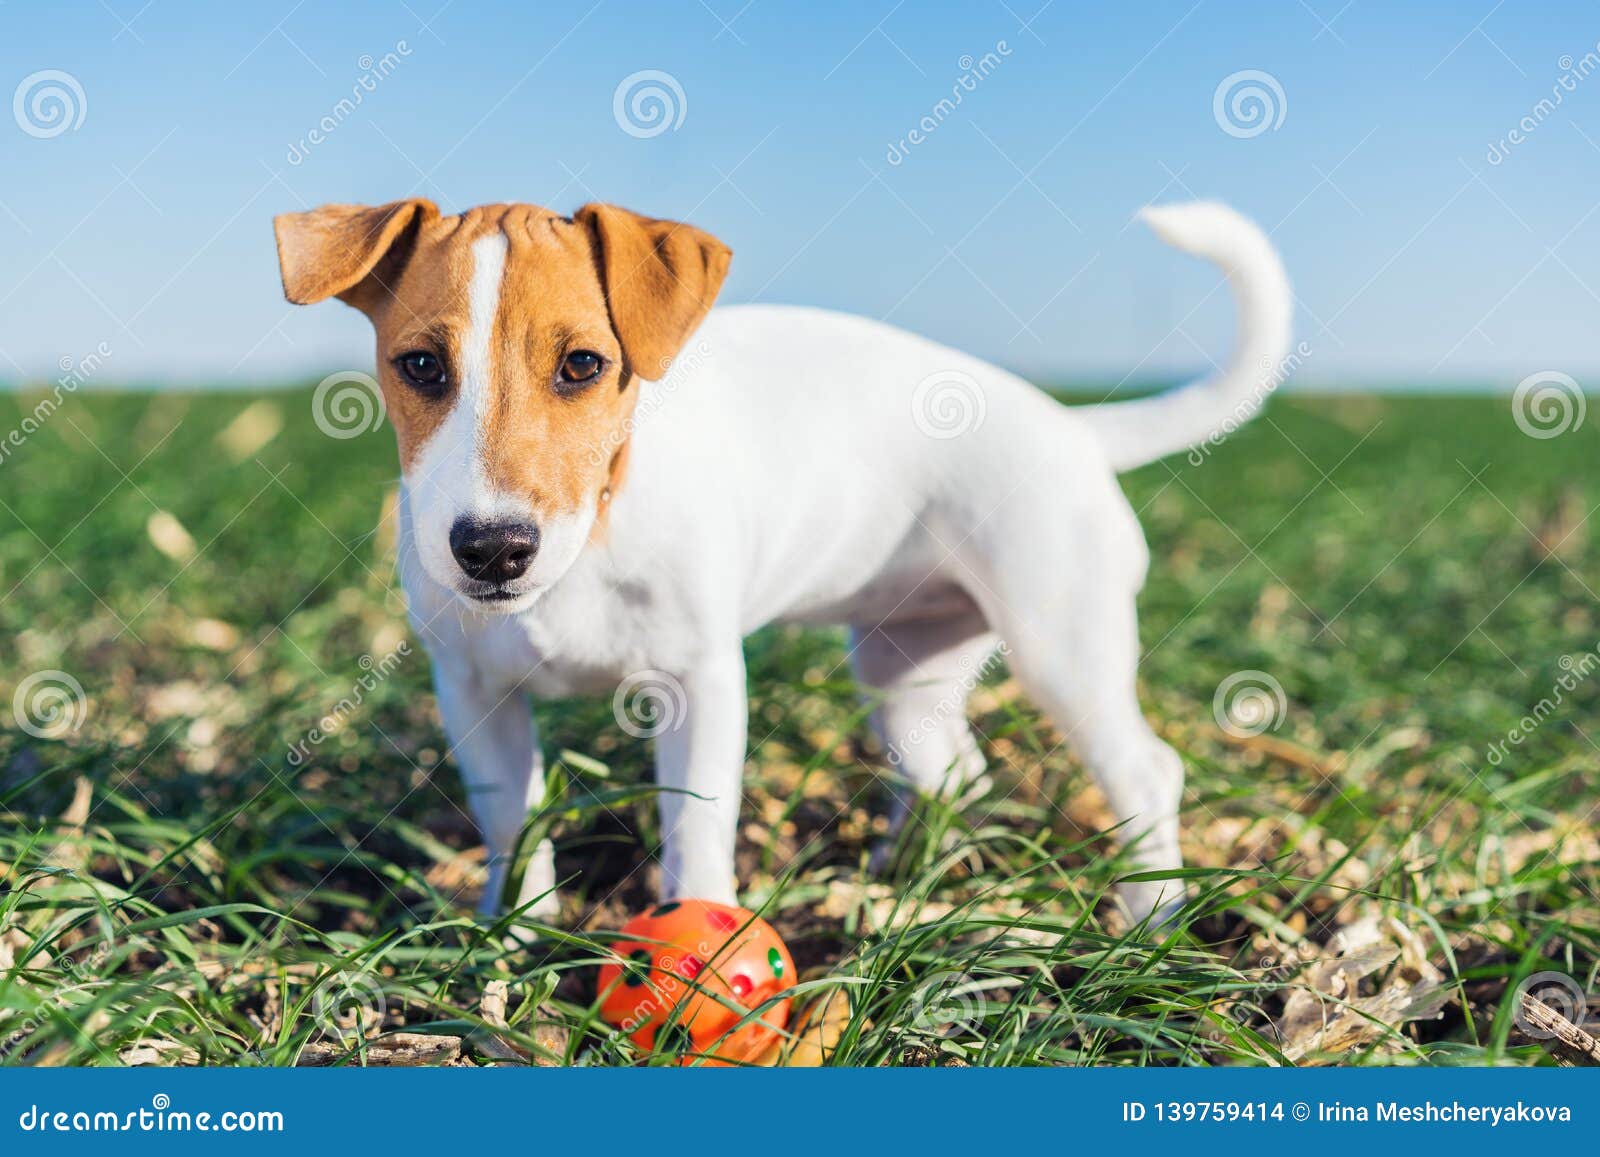 cute dog terrier jack russell playful with a colorful ball on a walk in the summer in the meadow